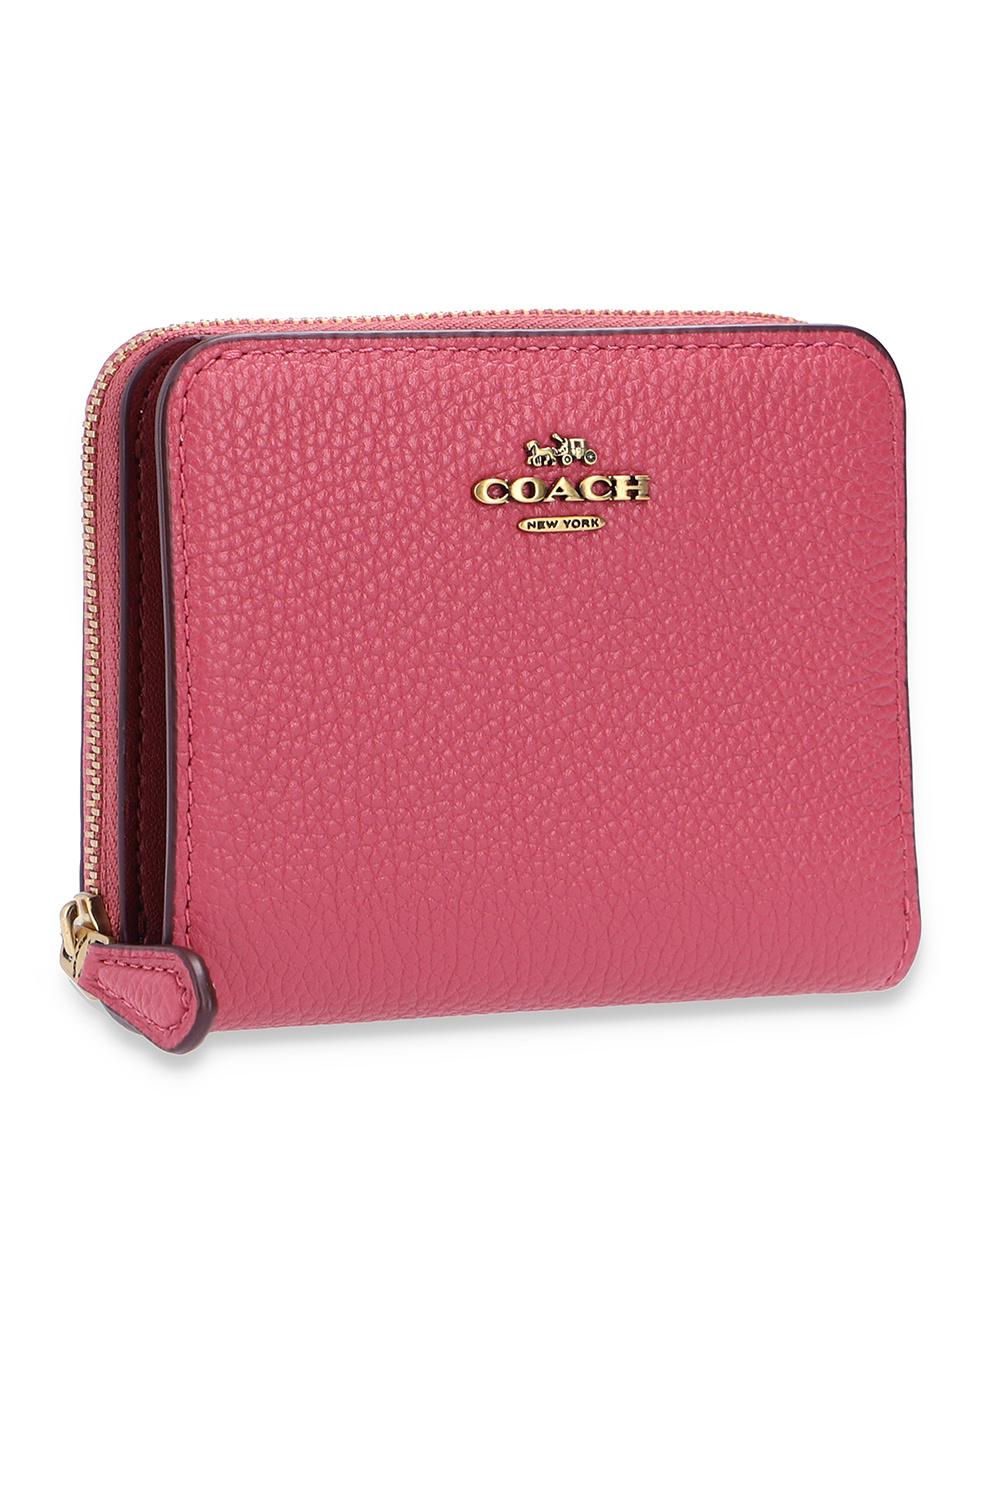 COACH Wallet With Logo Pink | Lyst Canada